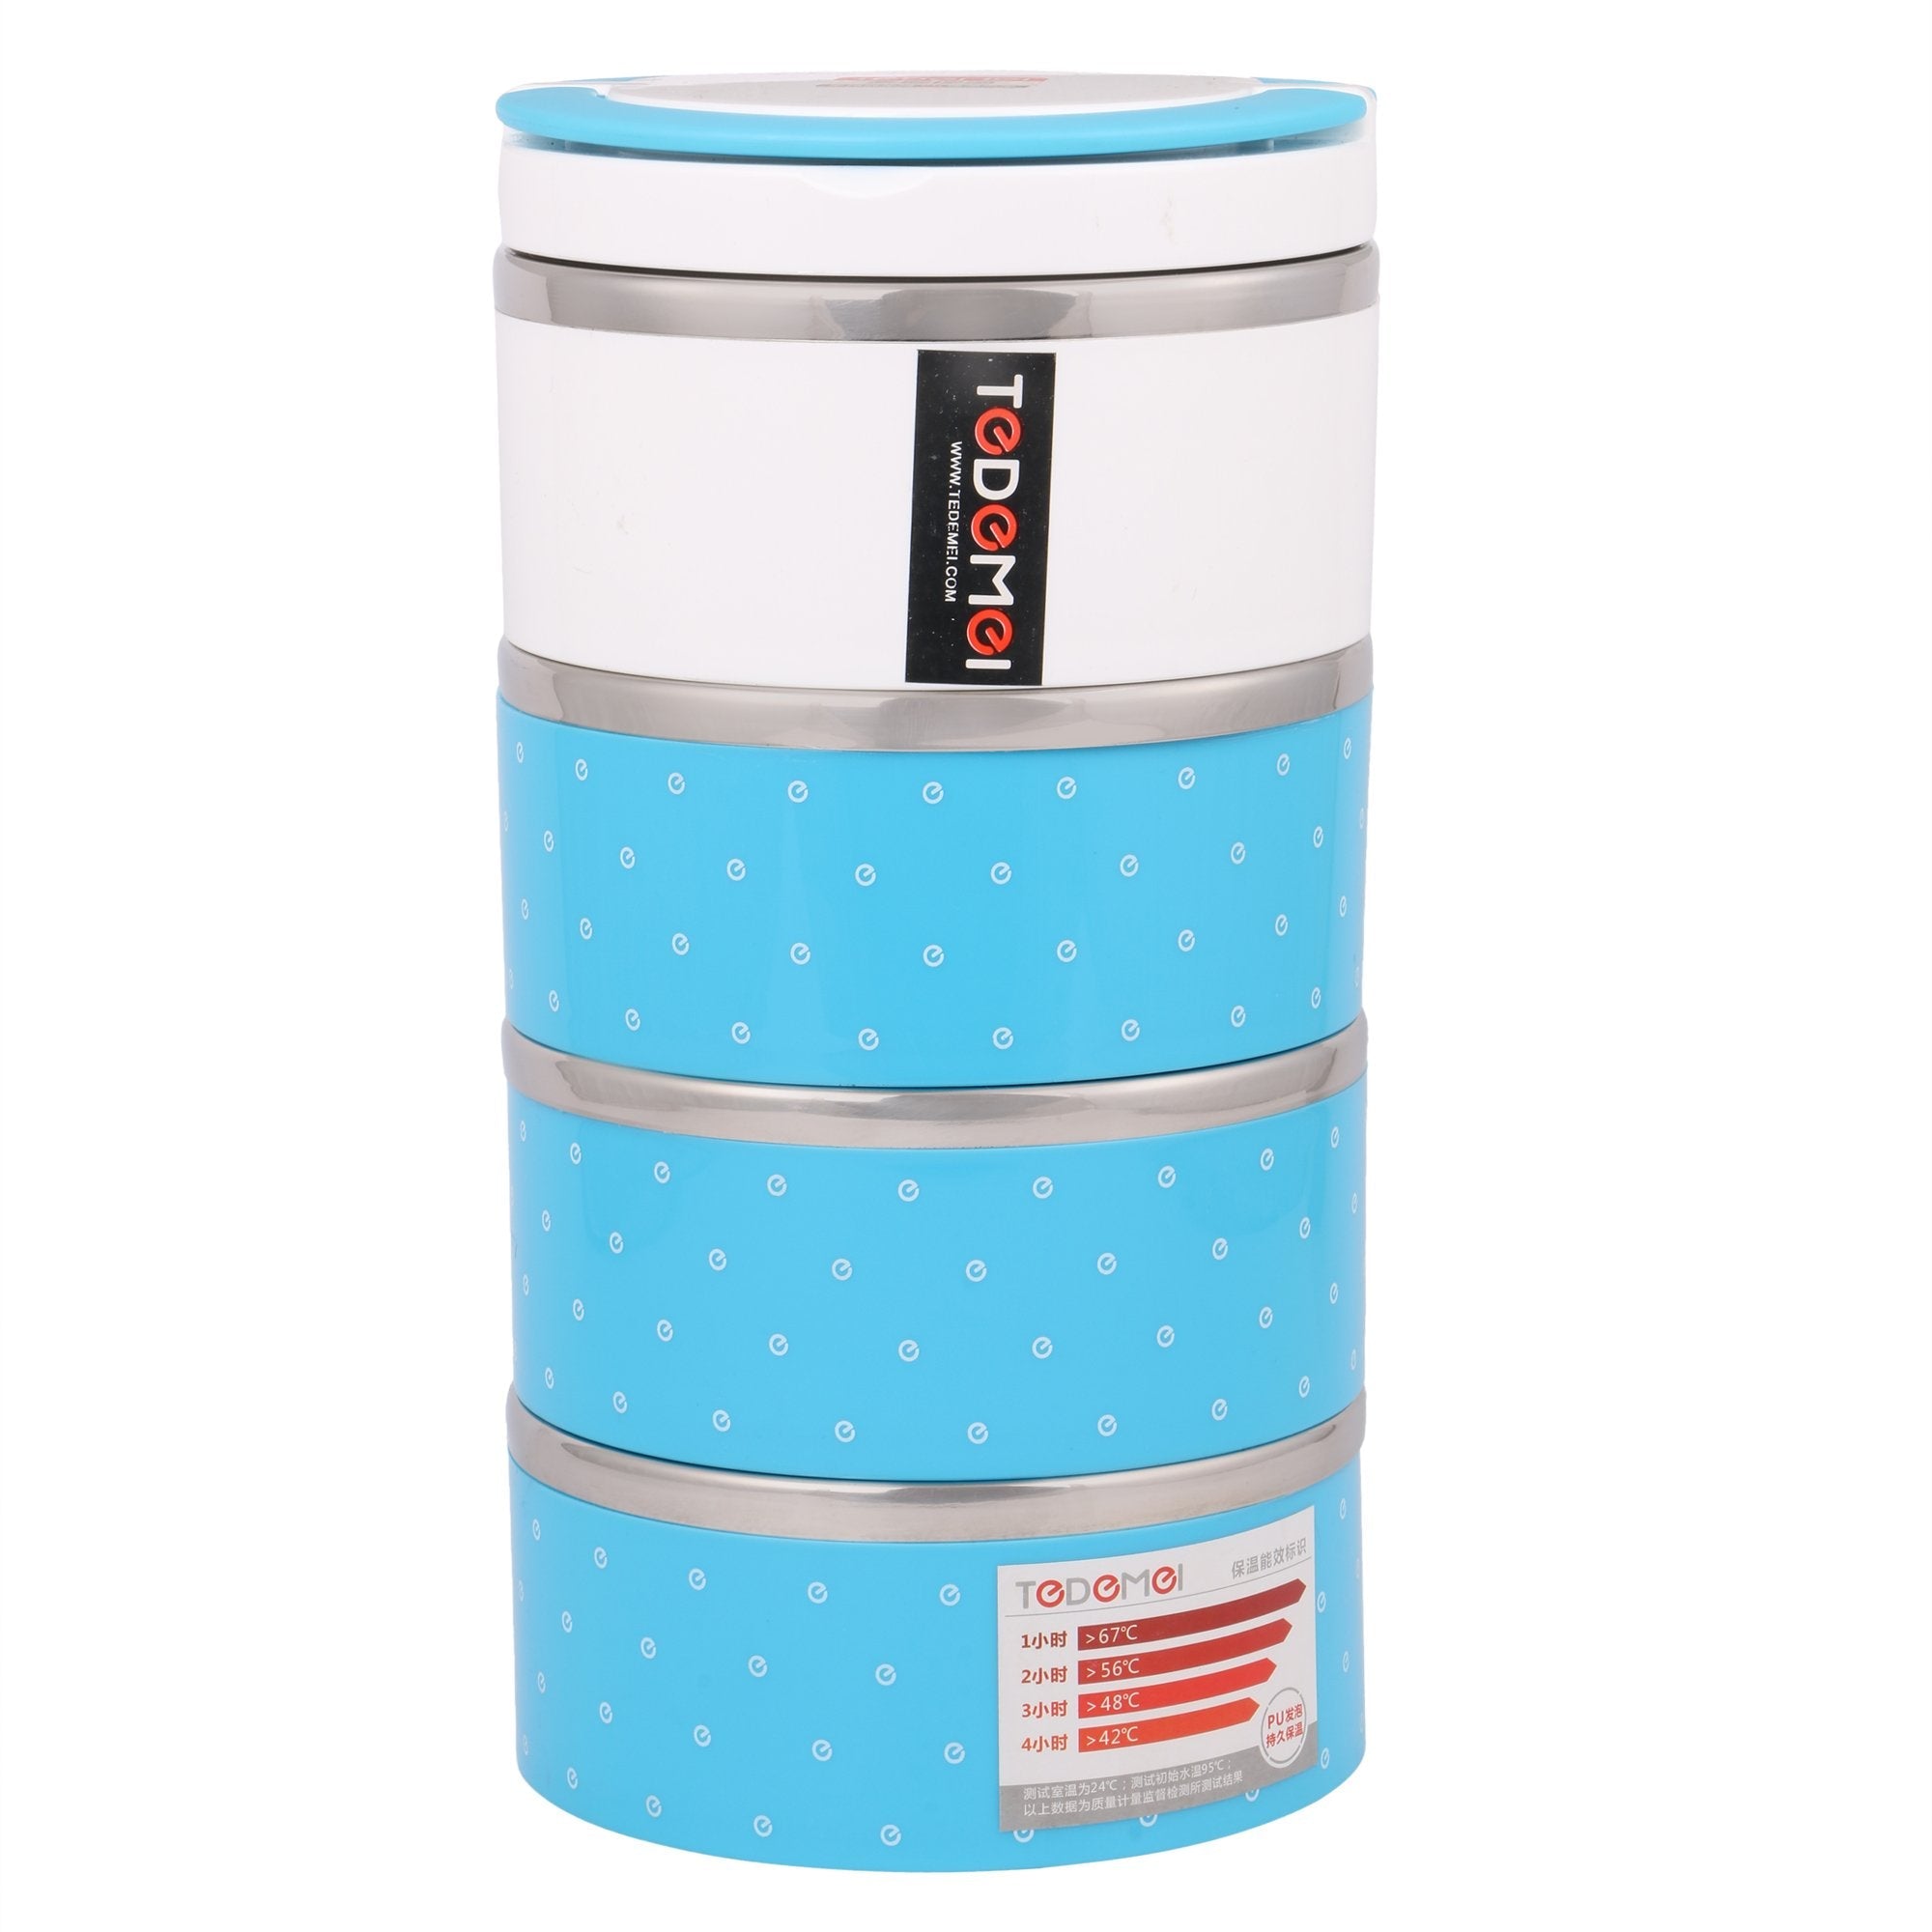 Stainless Steel 4 Layer Storage Insulated Lunch Box 6518